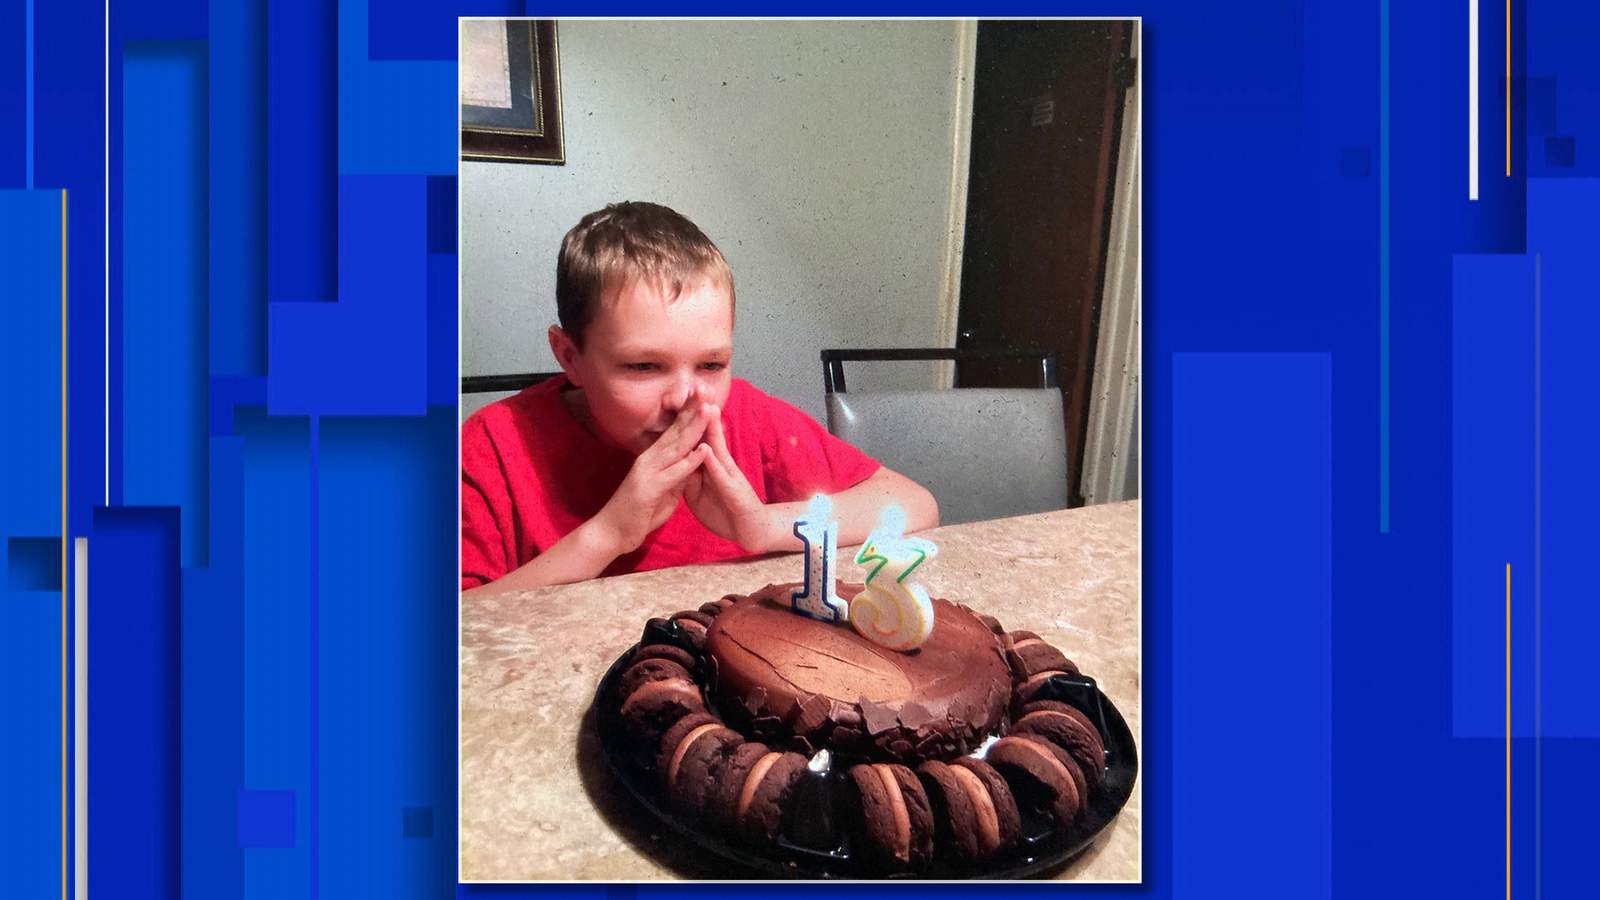 Livonia police: Missing 13-year-old boy located safely